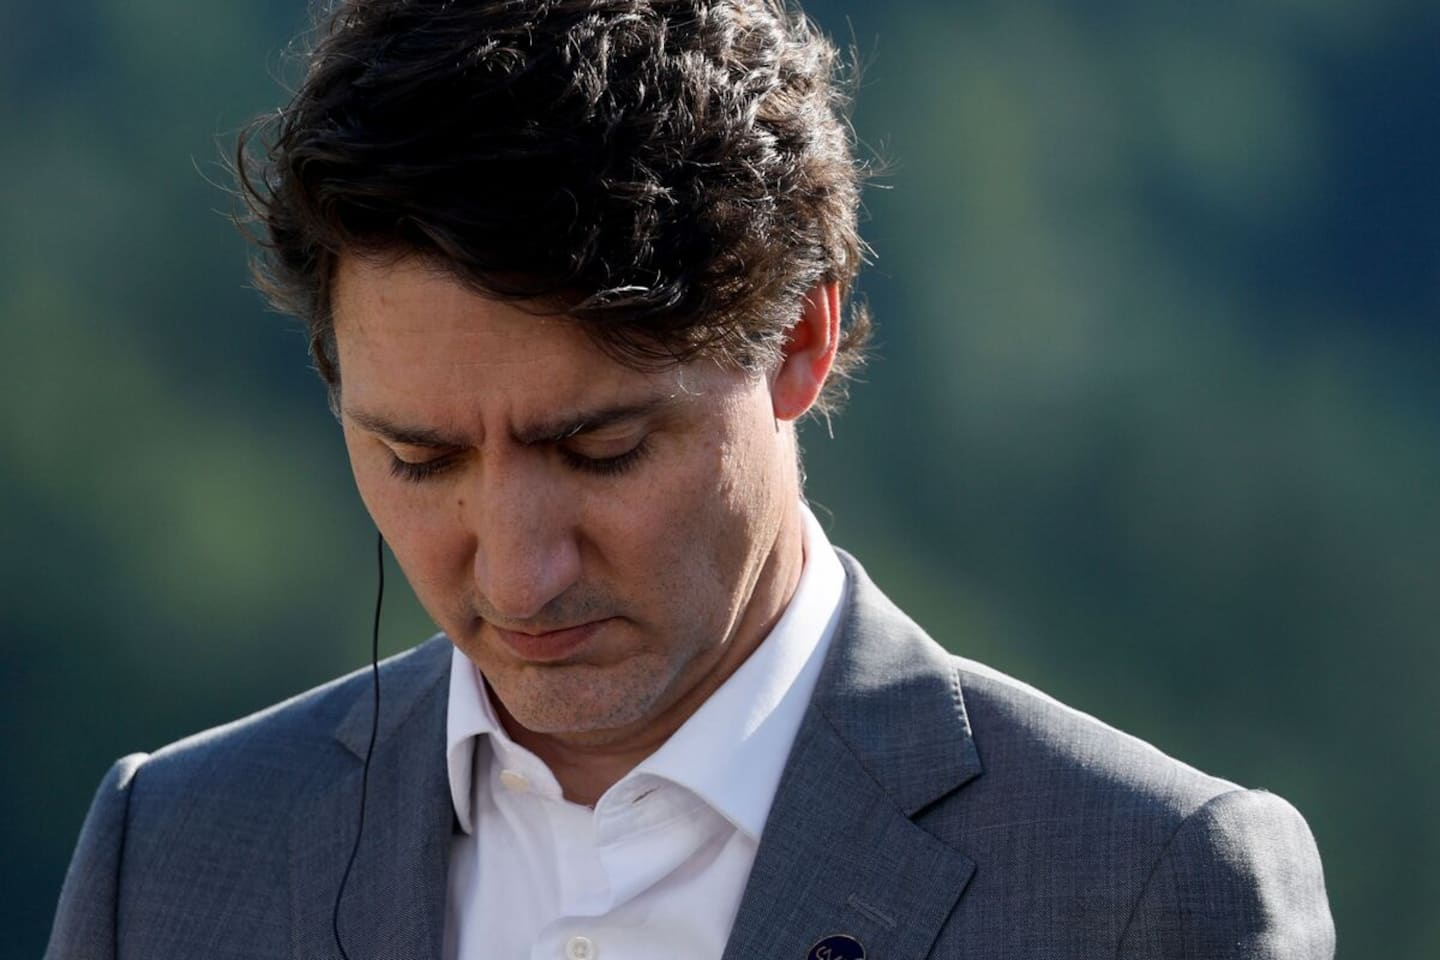 Scandal at Hockey Canada: “a lot of people have lost confidence”, says Justin Trudeau